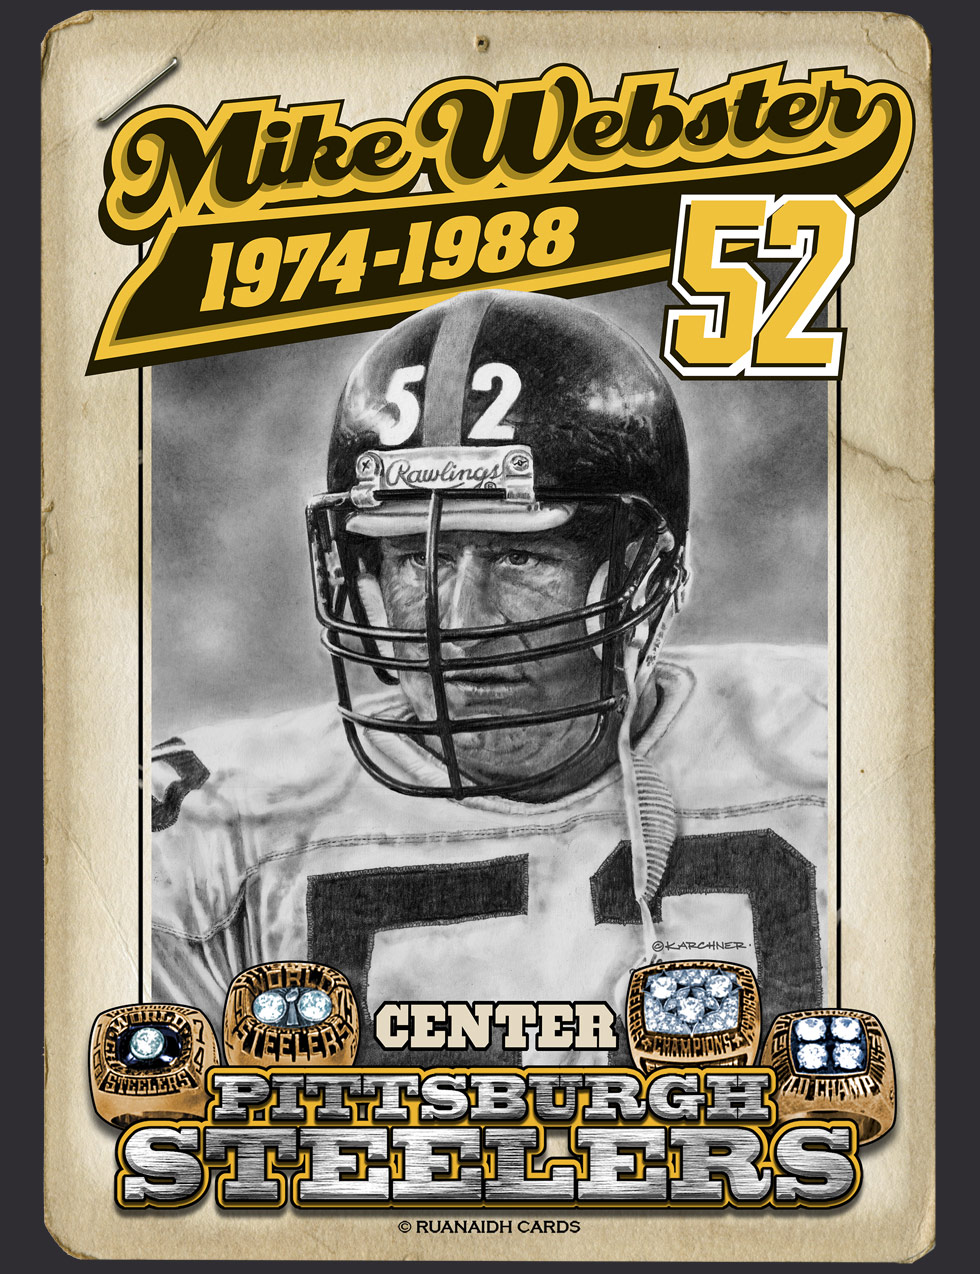 Photo of Mike Webster trading card